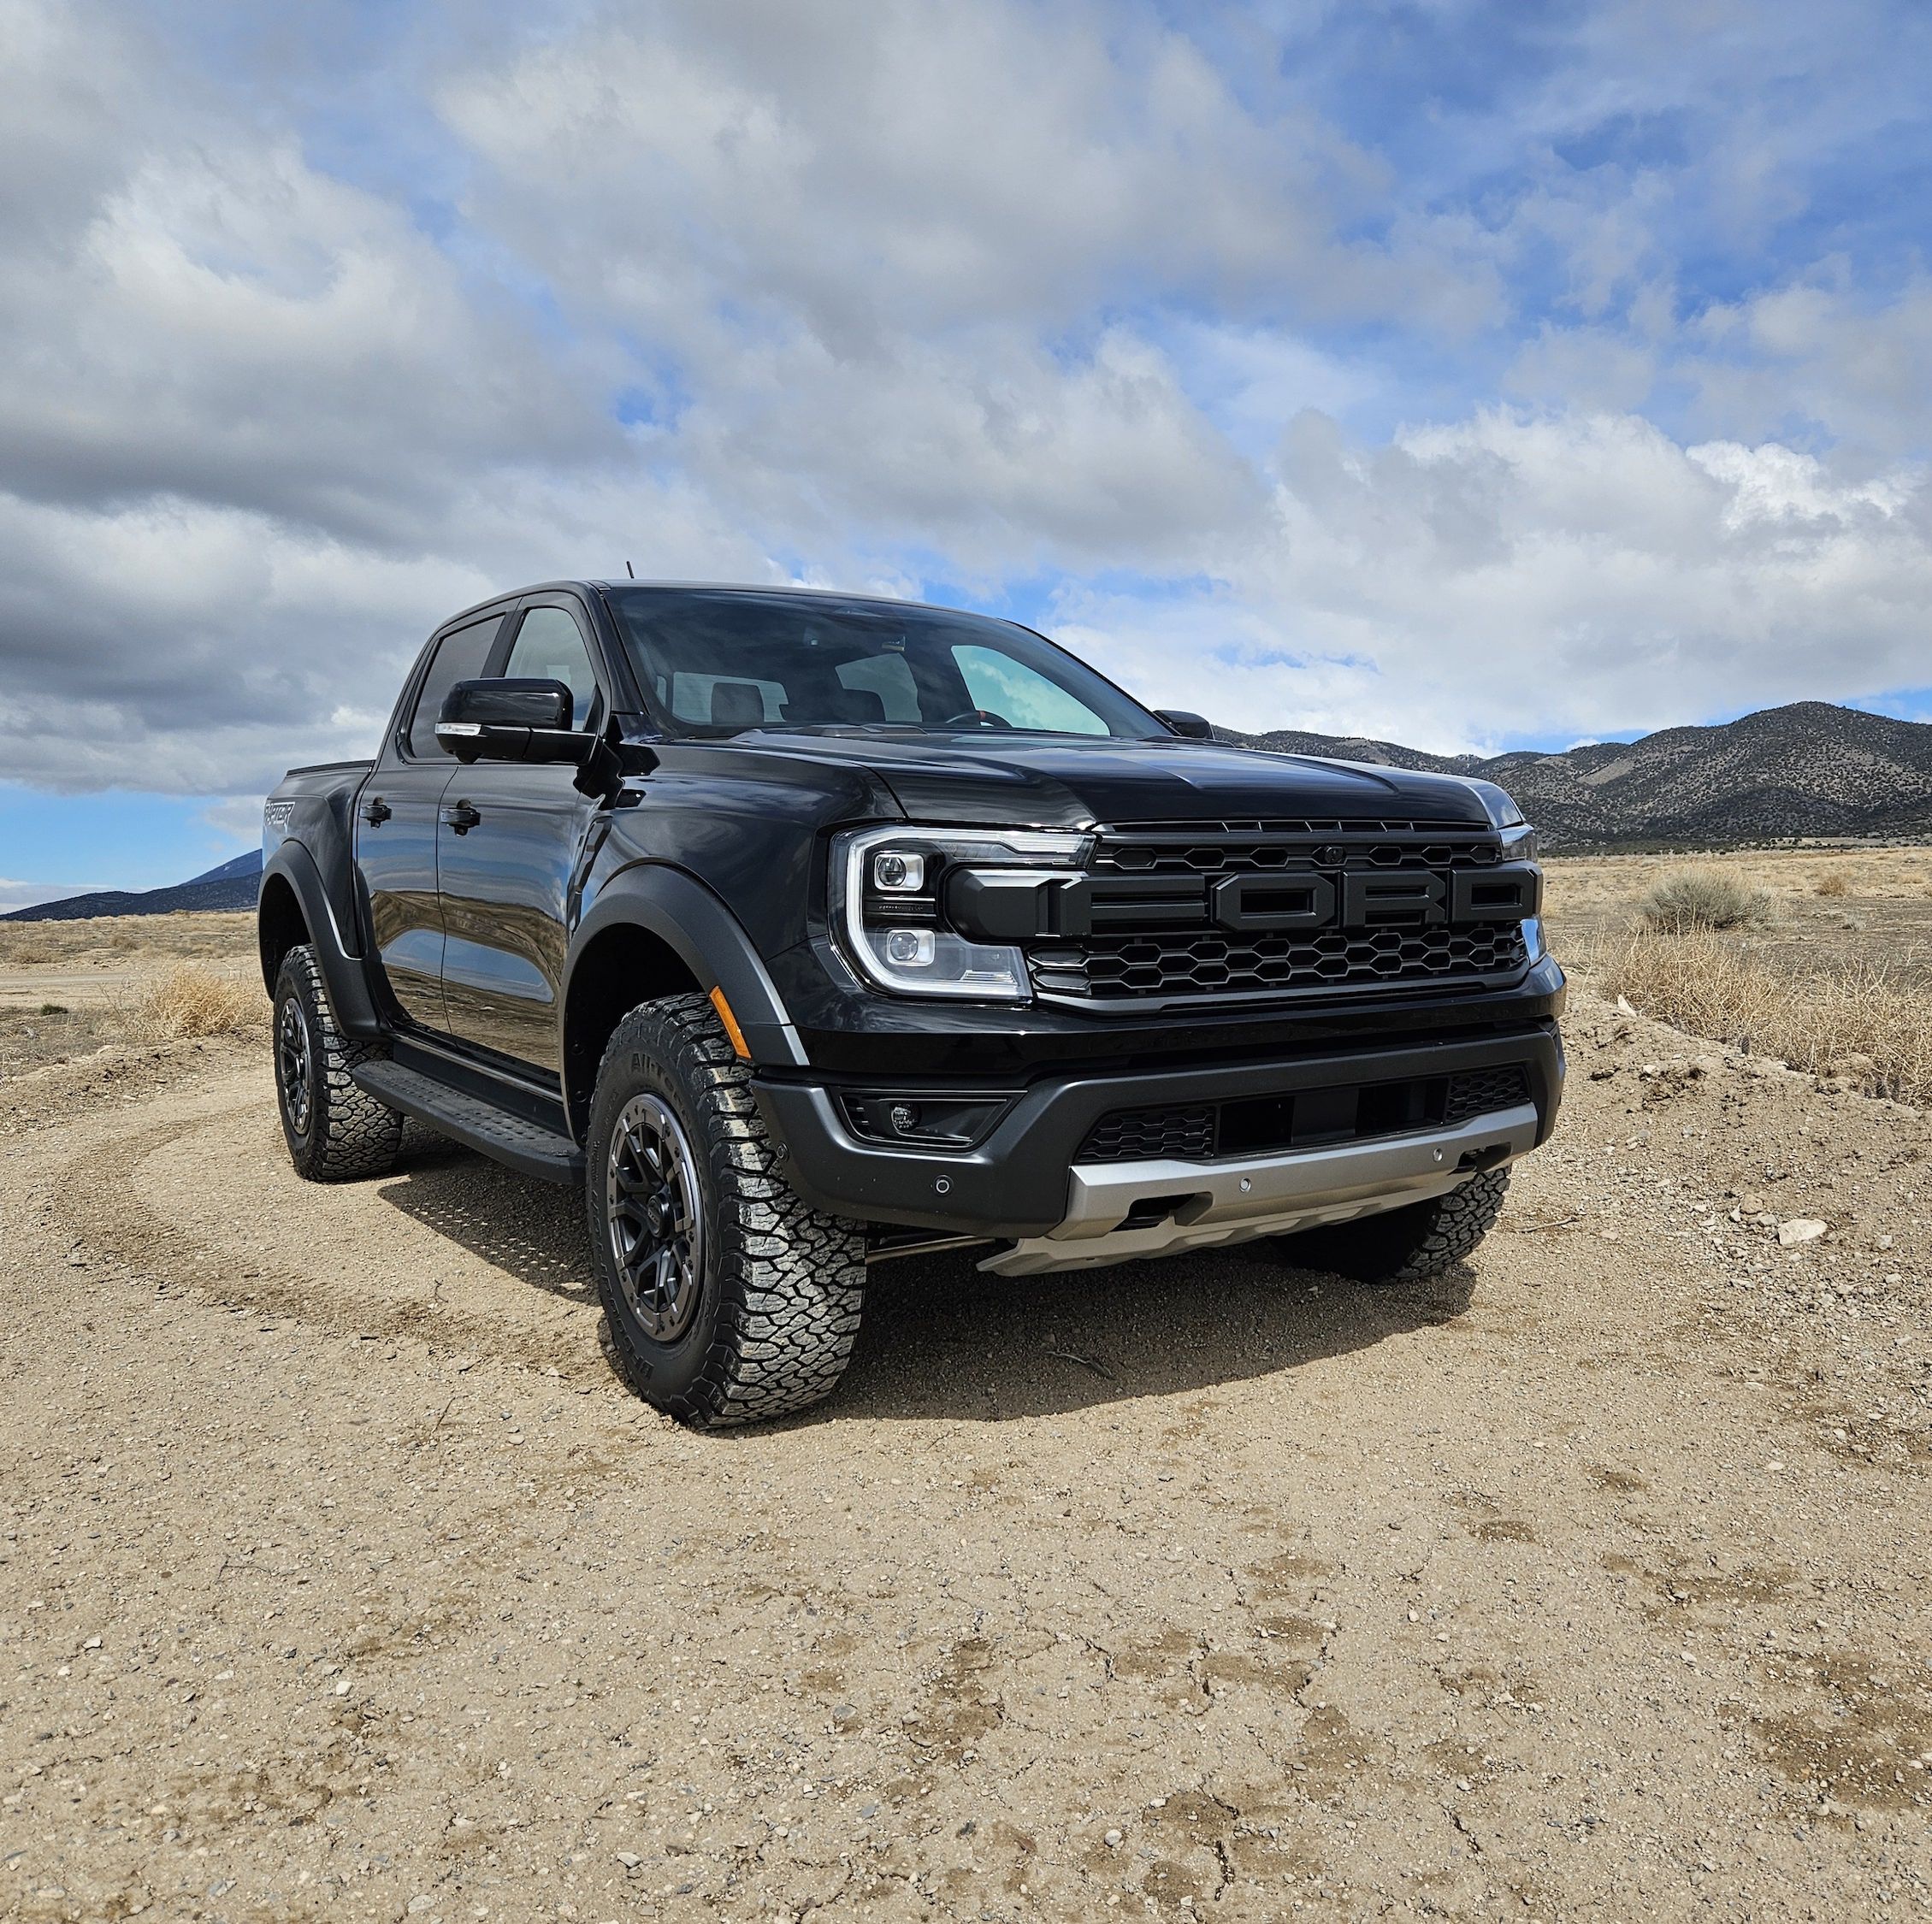 Ford's Baby Raptor Isn't Short on Off-Road Fun